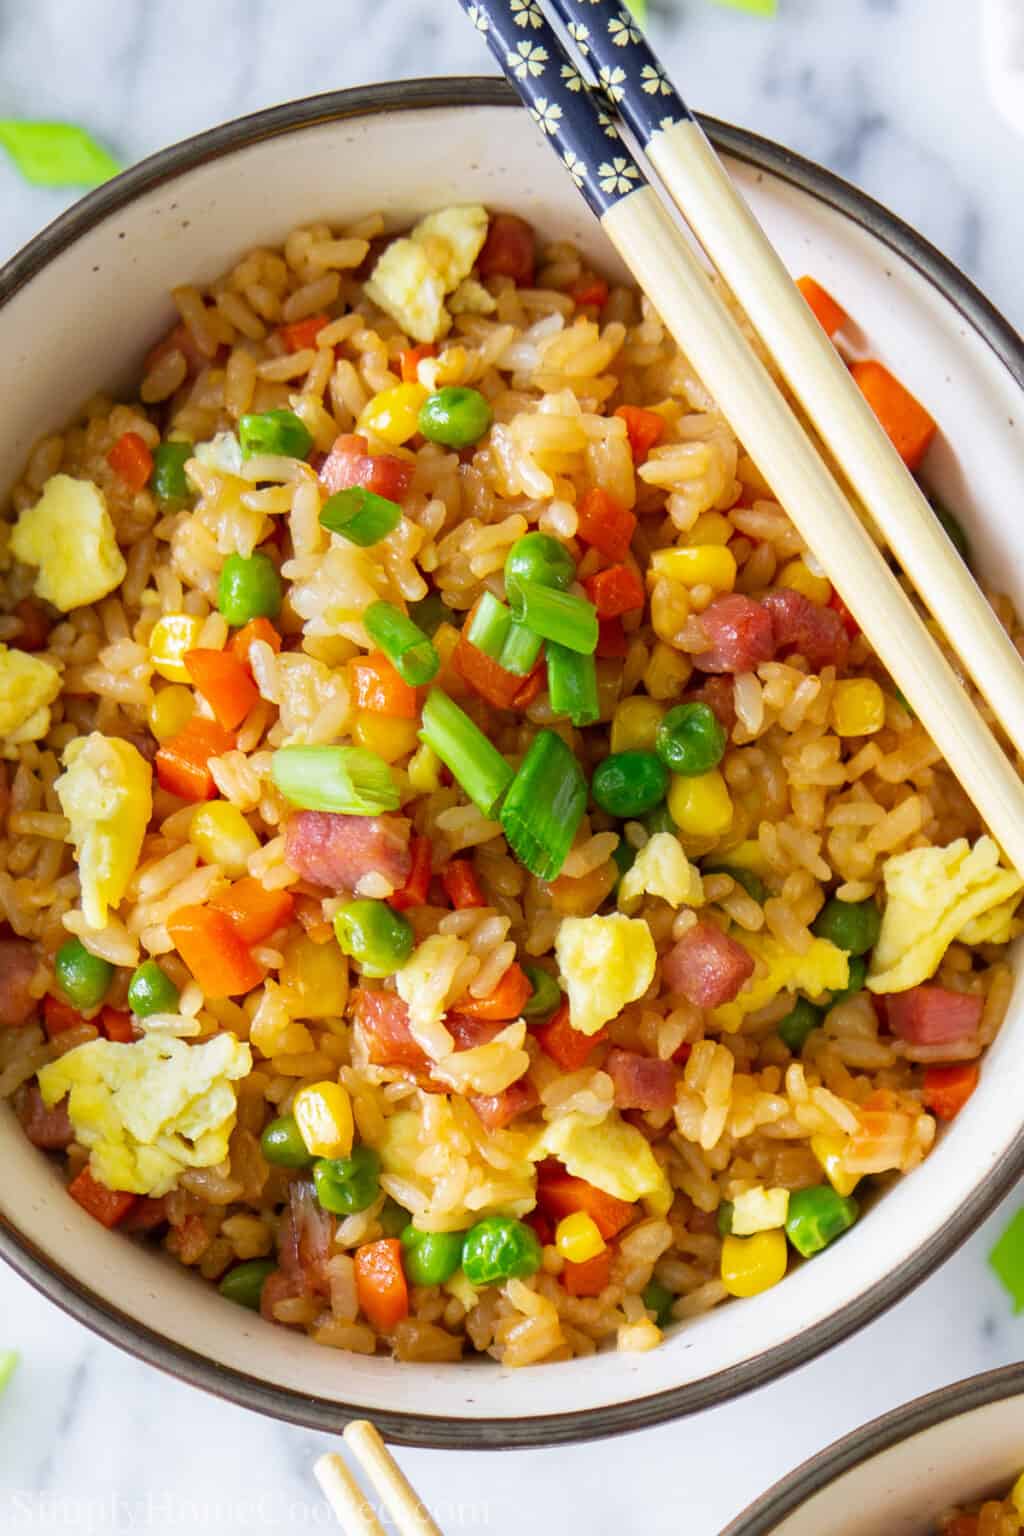 Pork Fried Rice Recipe - Simply Home Cooked